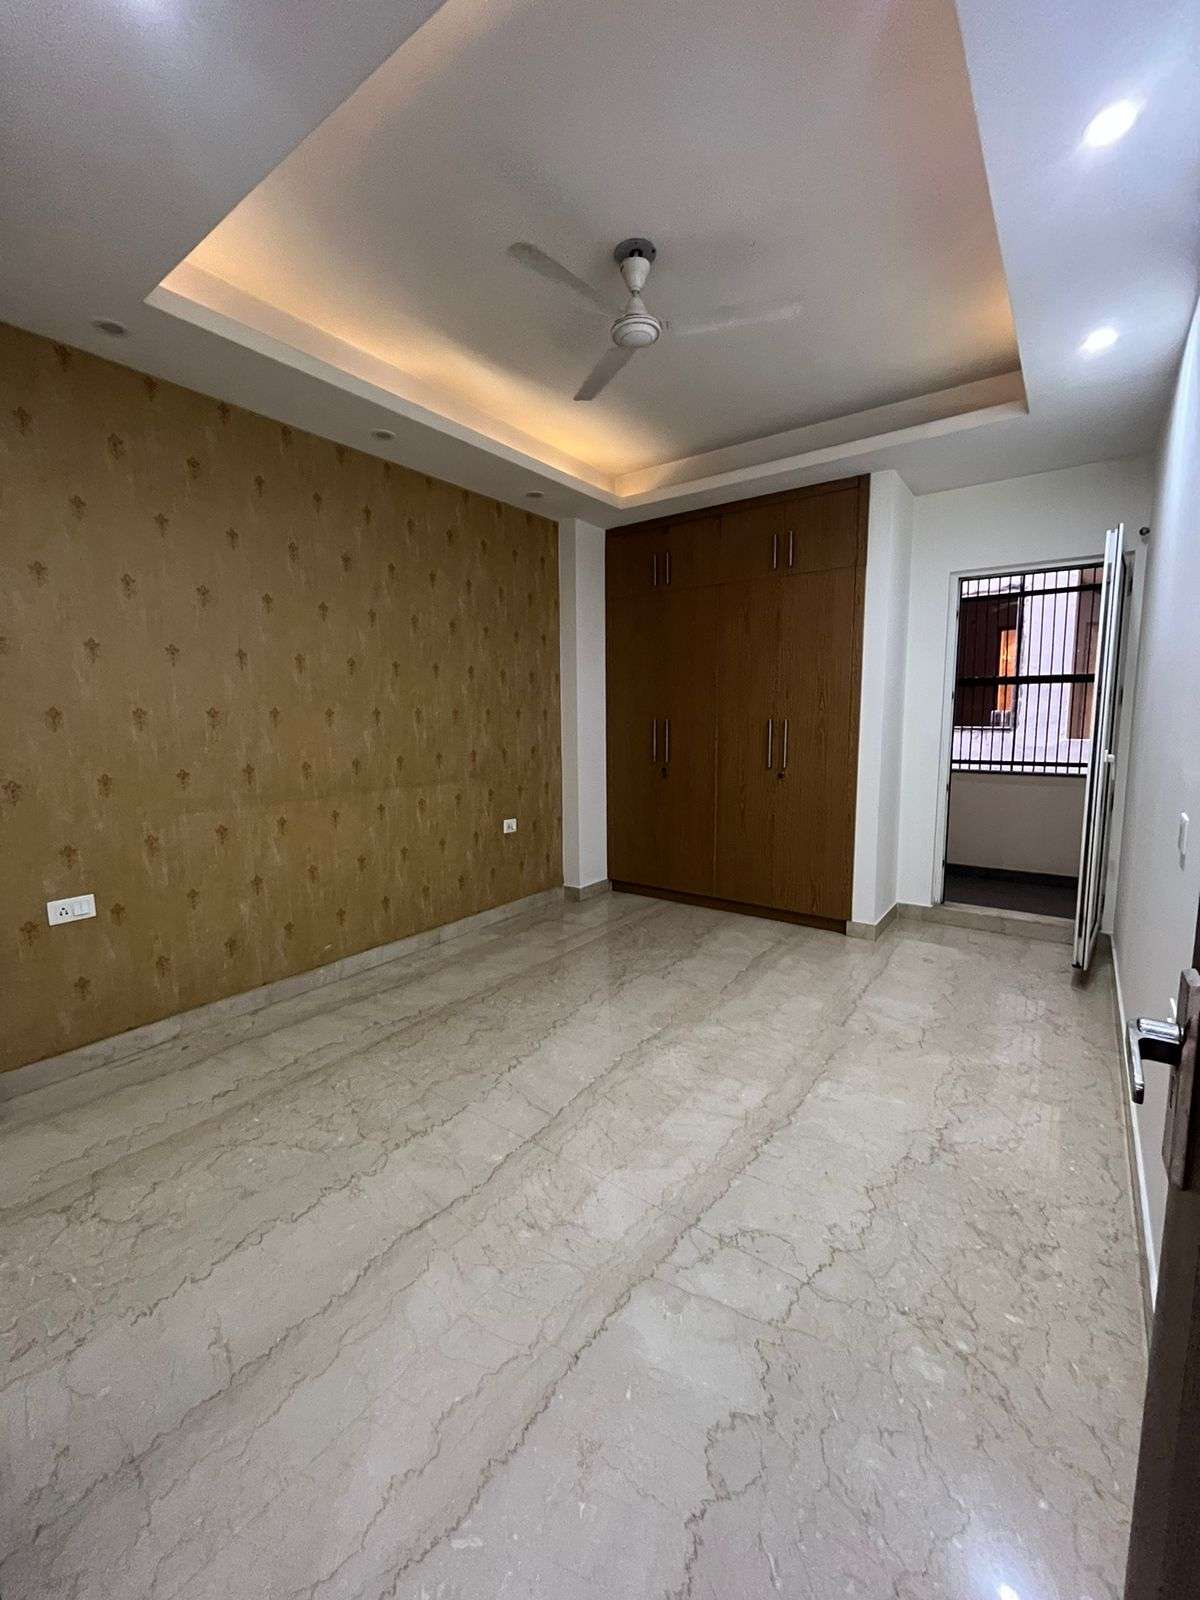 3.5 BHK Apartment For Rent in Gold Croft Apartment Sector 11 Dwarka Delhi 6432184